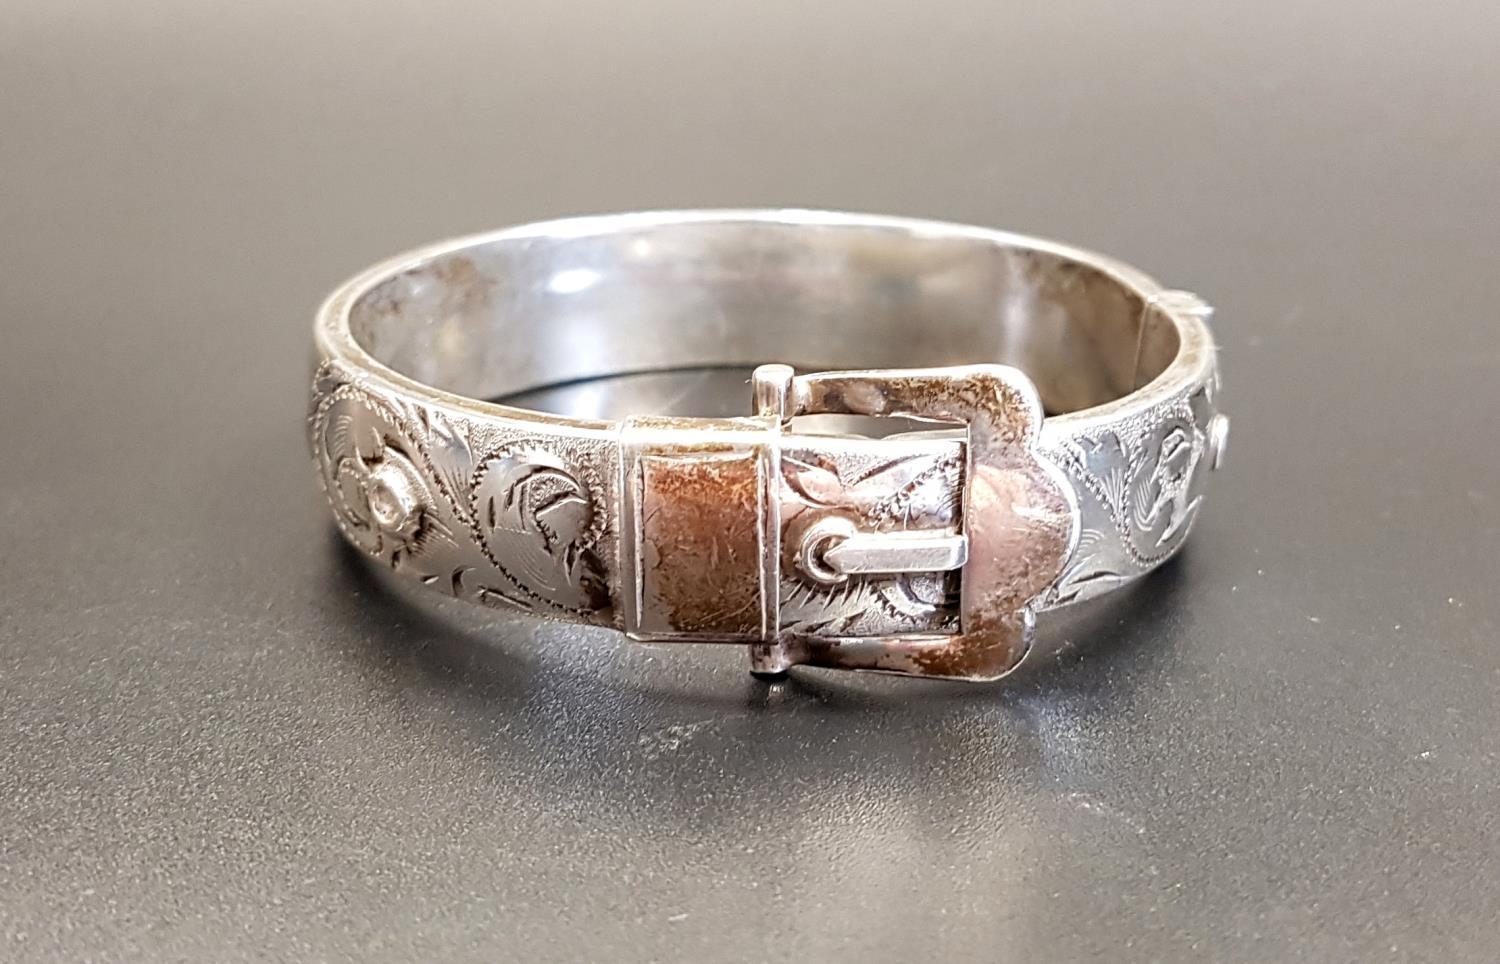 VICTORIAN STYLE SILVER BUCKLE STYLE BANGLE with engraved scroll decoration, Birmingham 1968